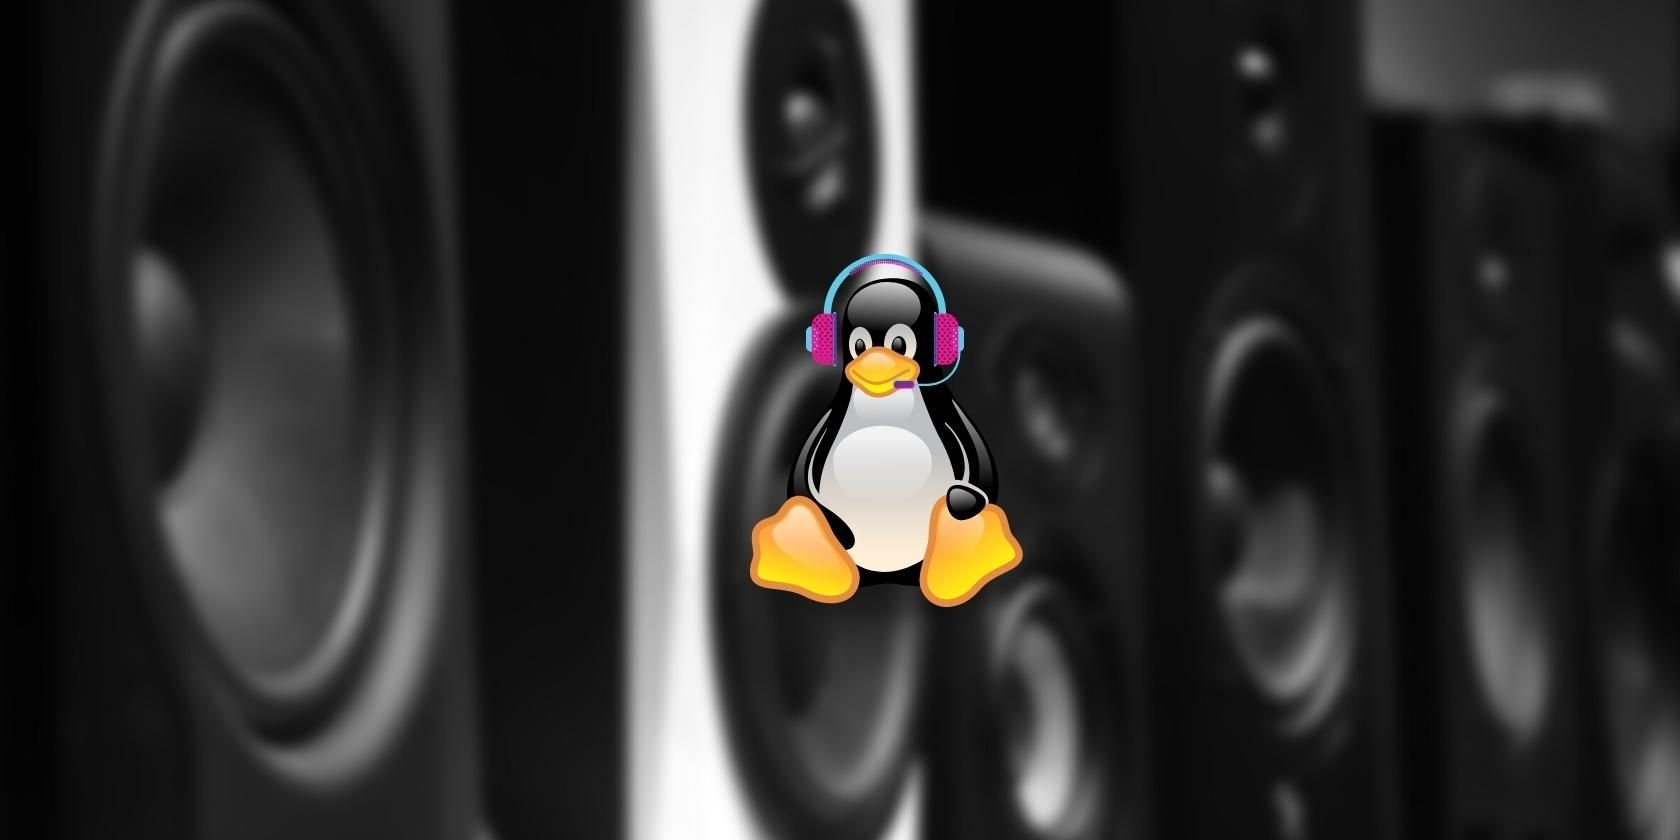 How to Fix Static Noise Issue in Linux